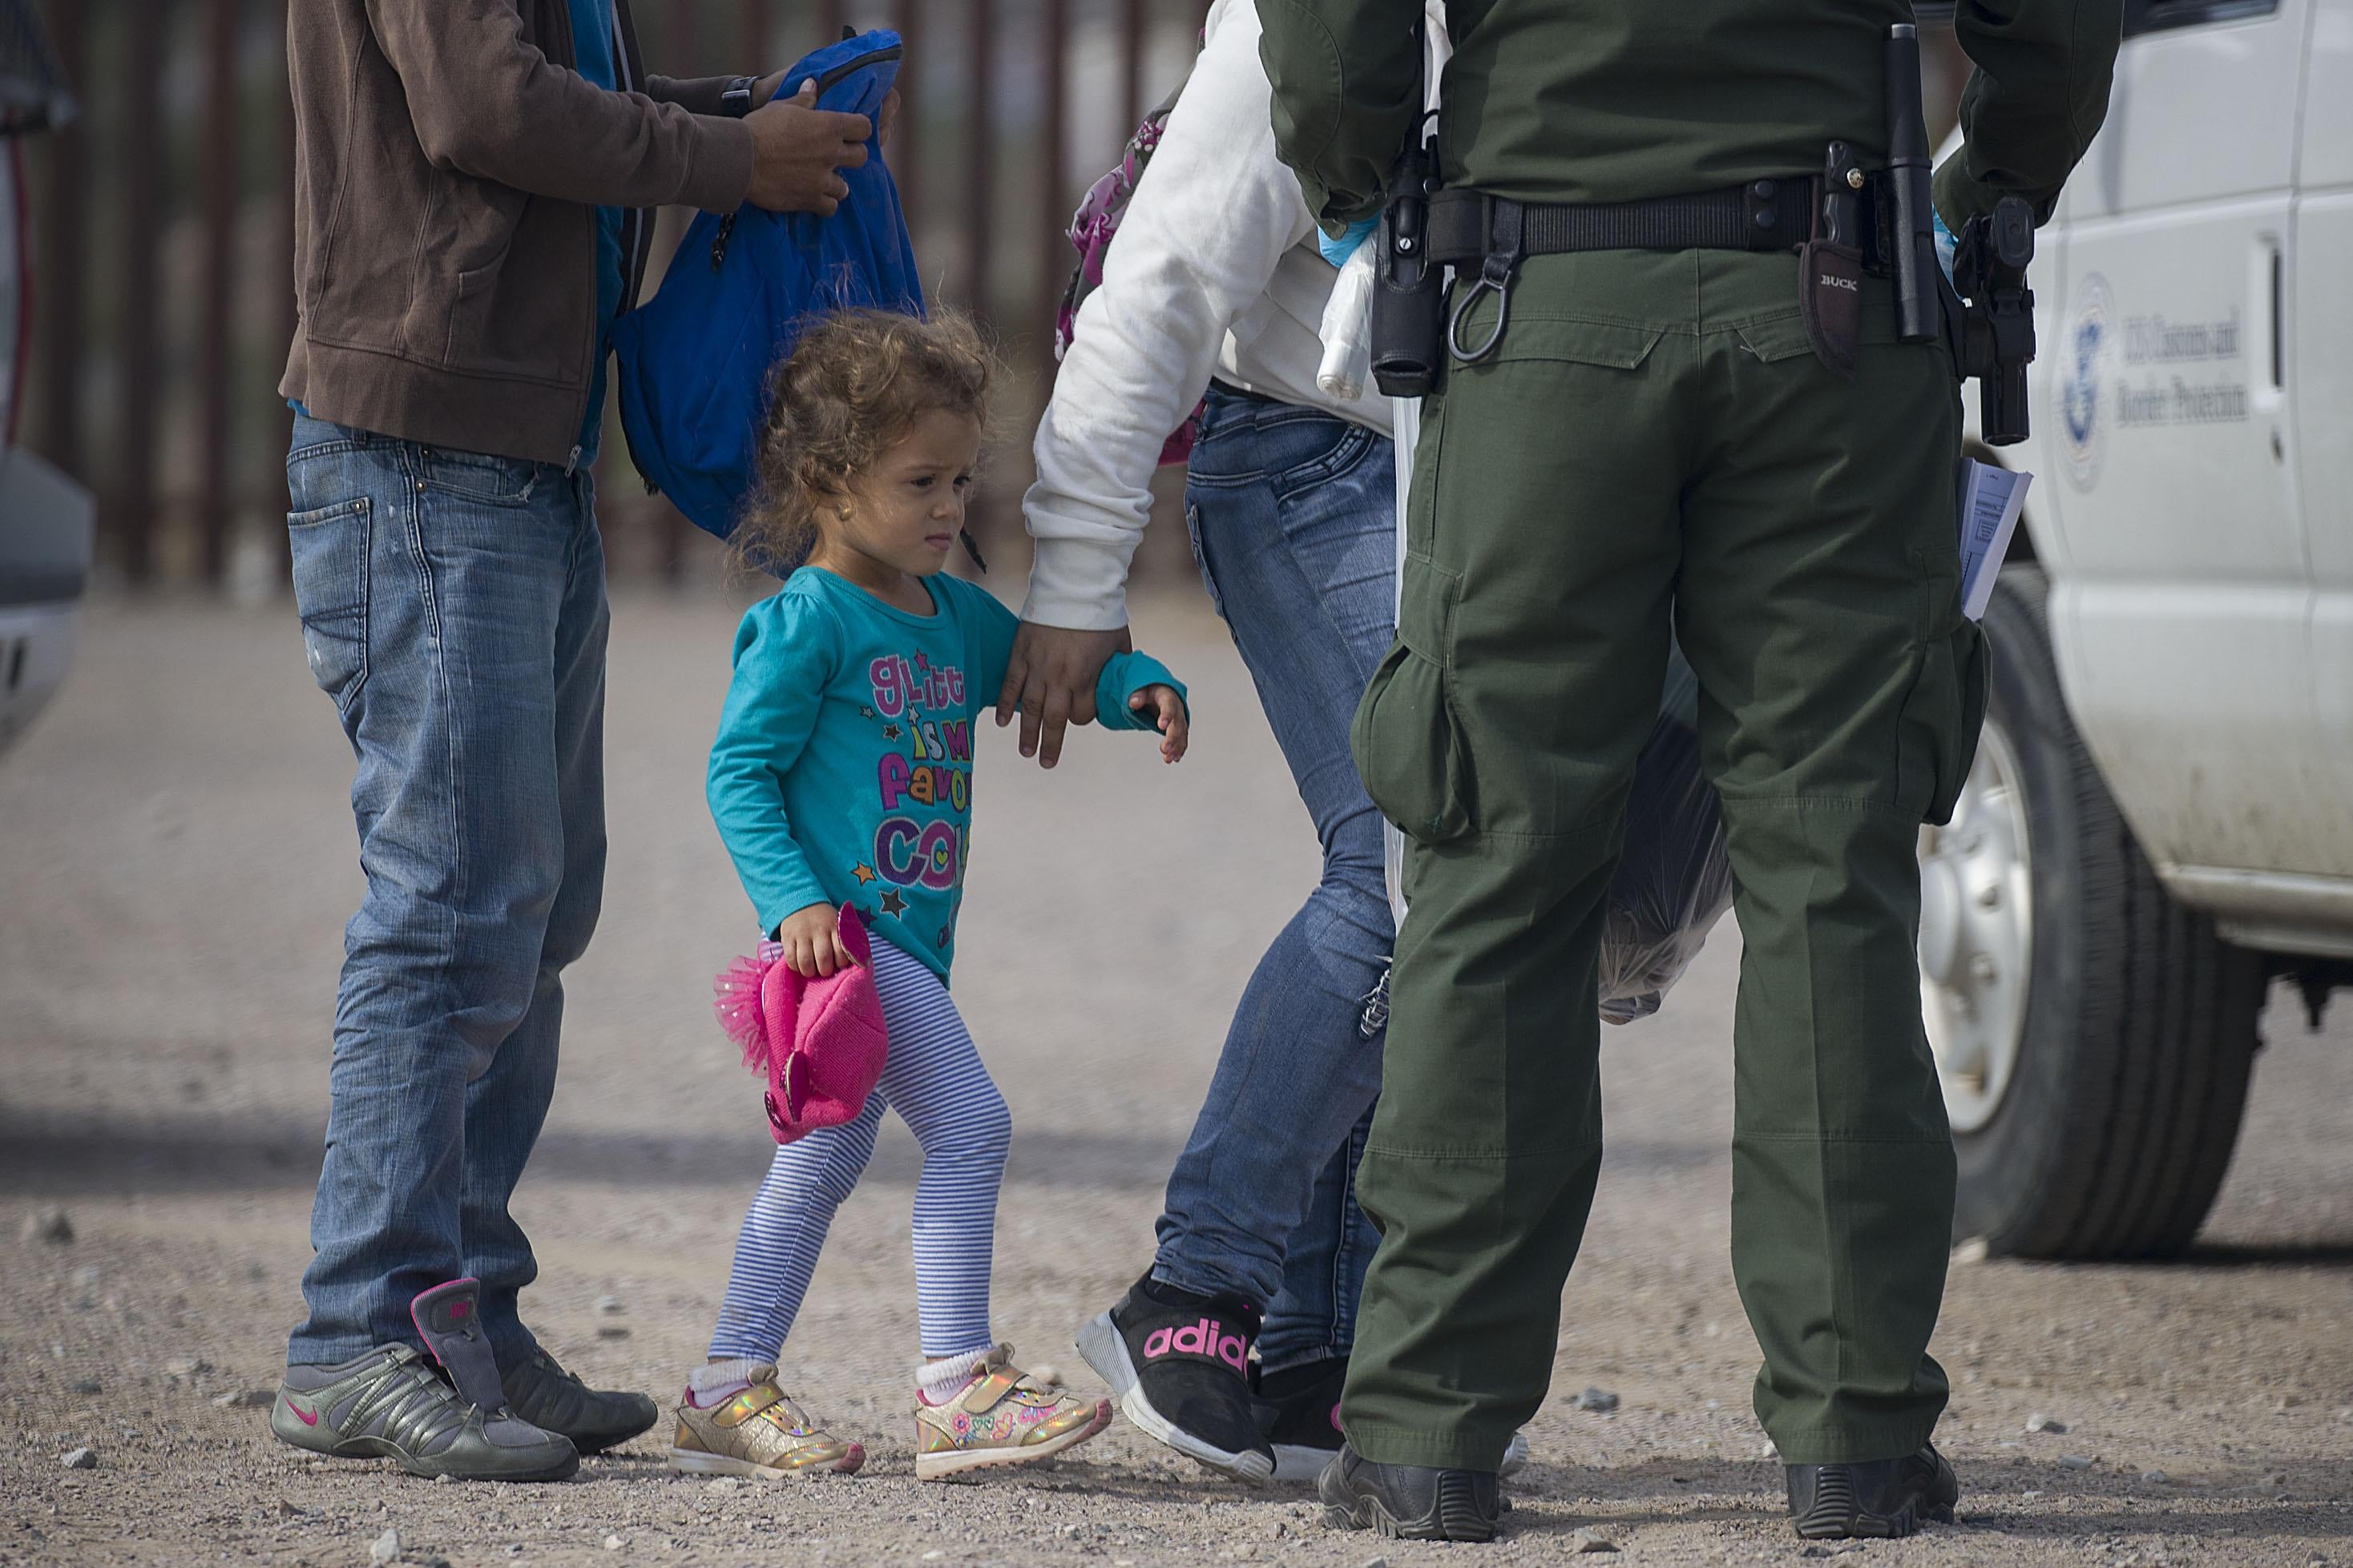 A young child is processed by Border Patrol agents.